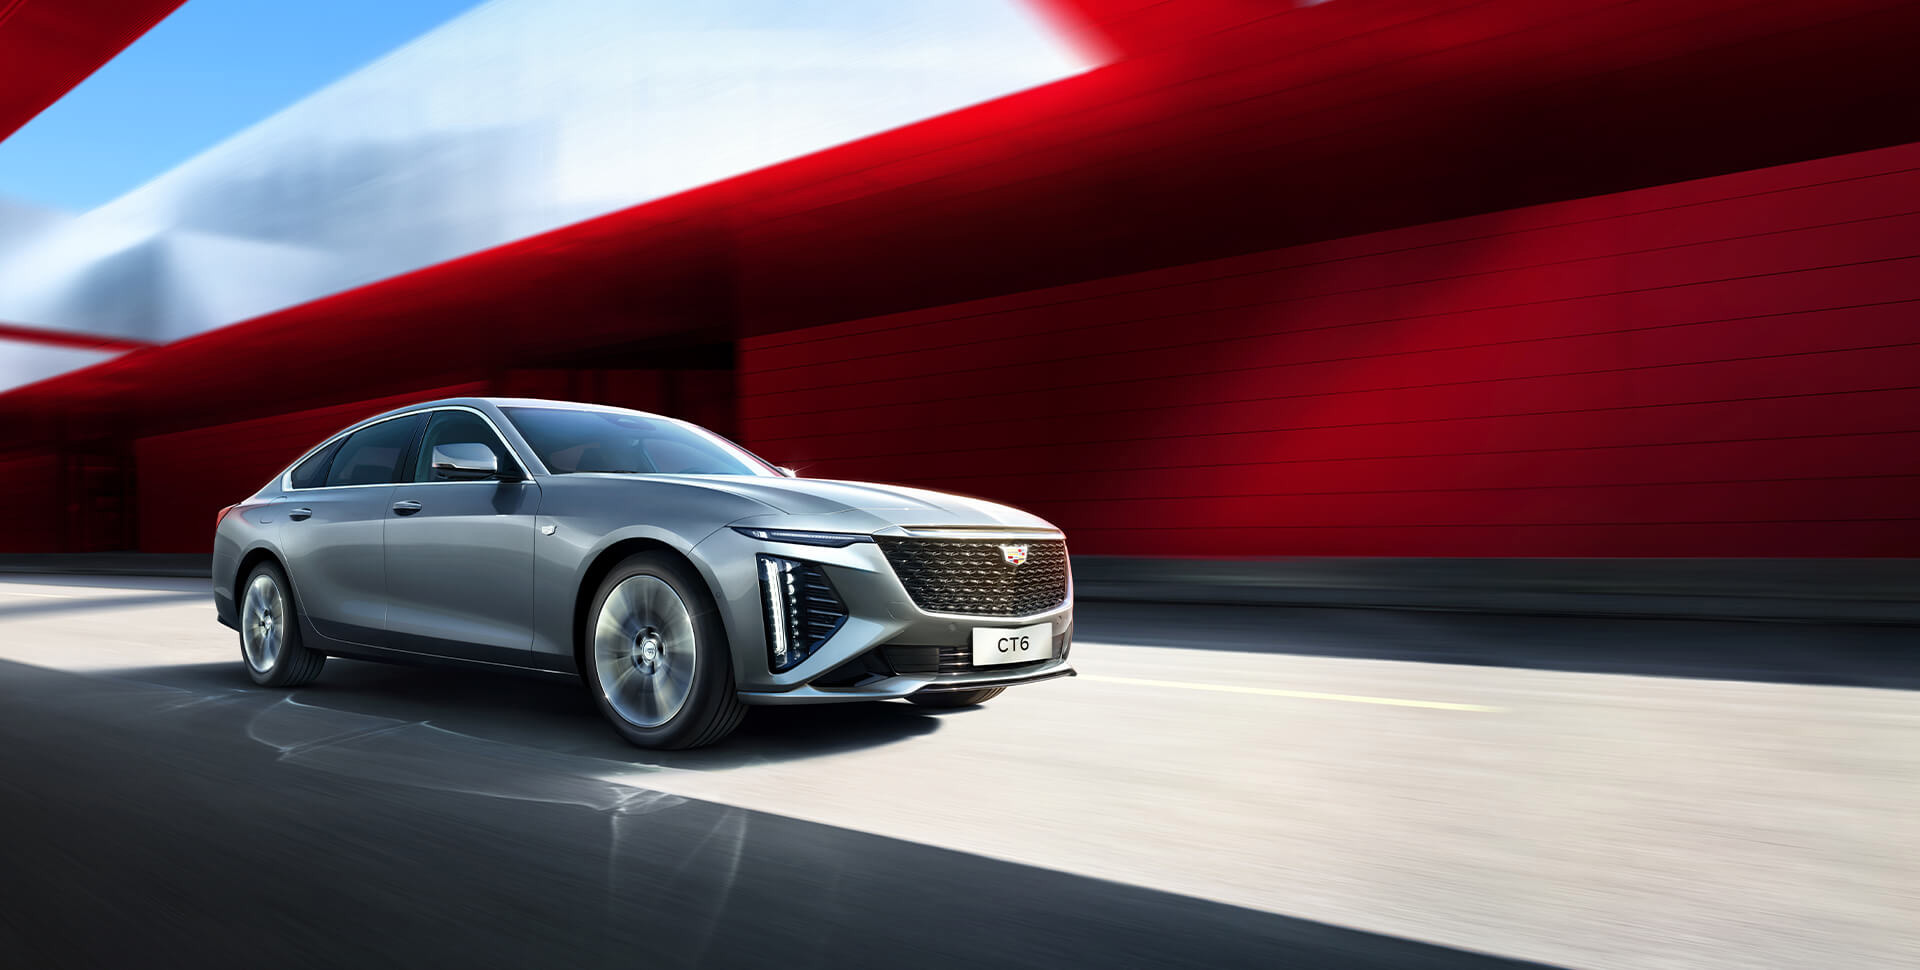 Redesigned Cadillac CT6 launches in China